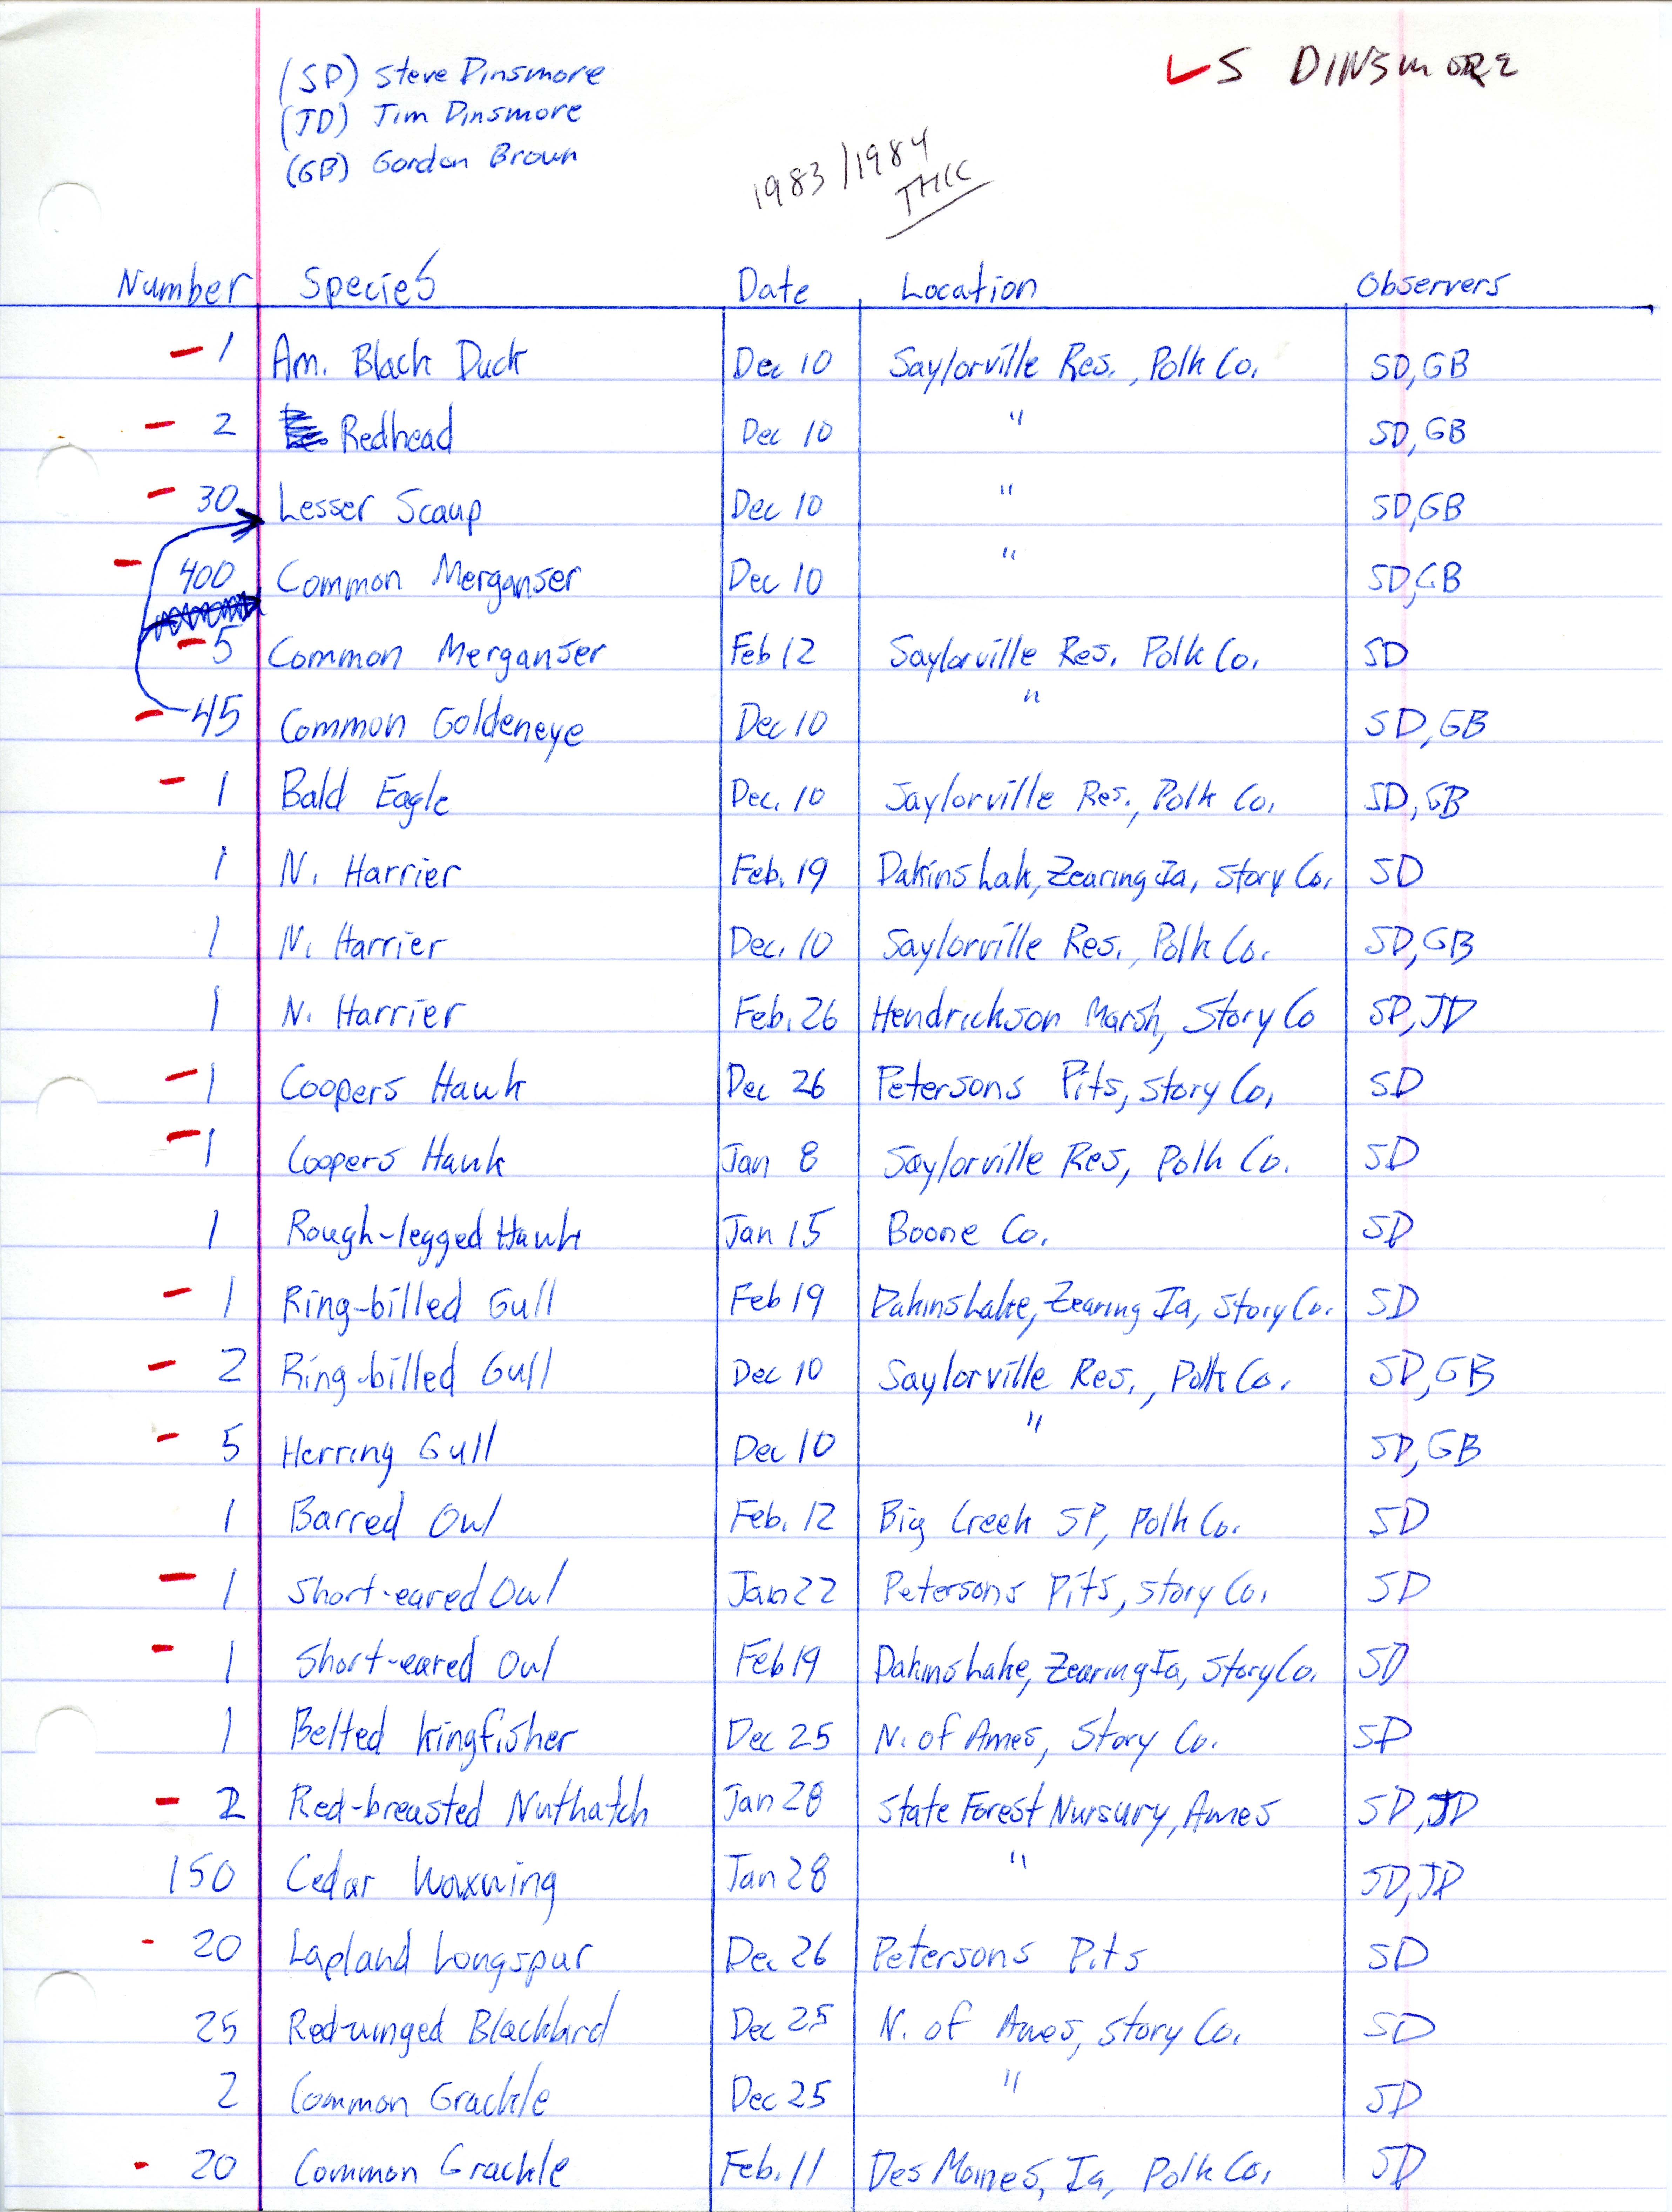 List of birds sighted by Stephen J. Dinsmore and others, winter 1983-1984